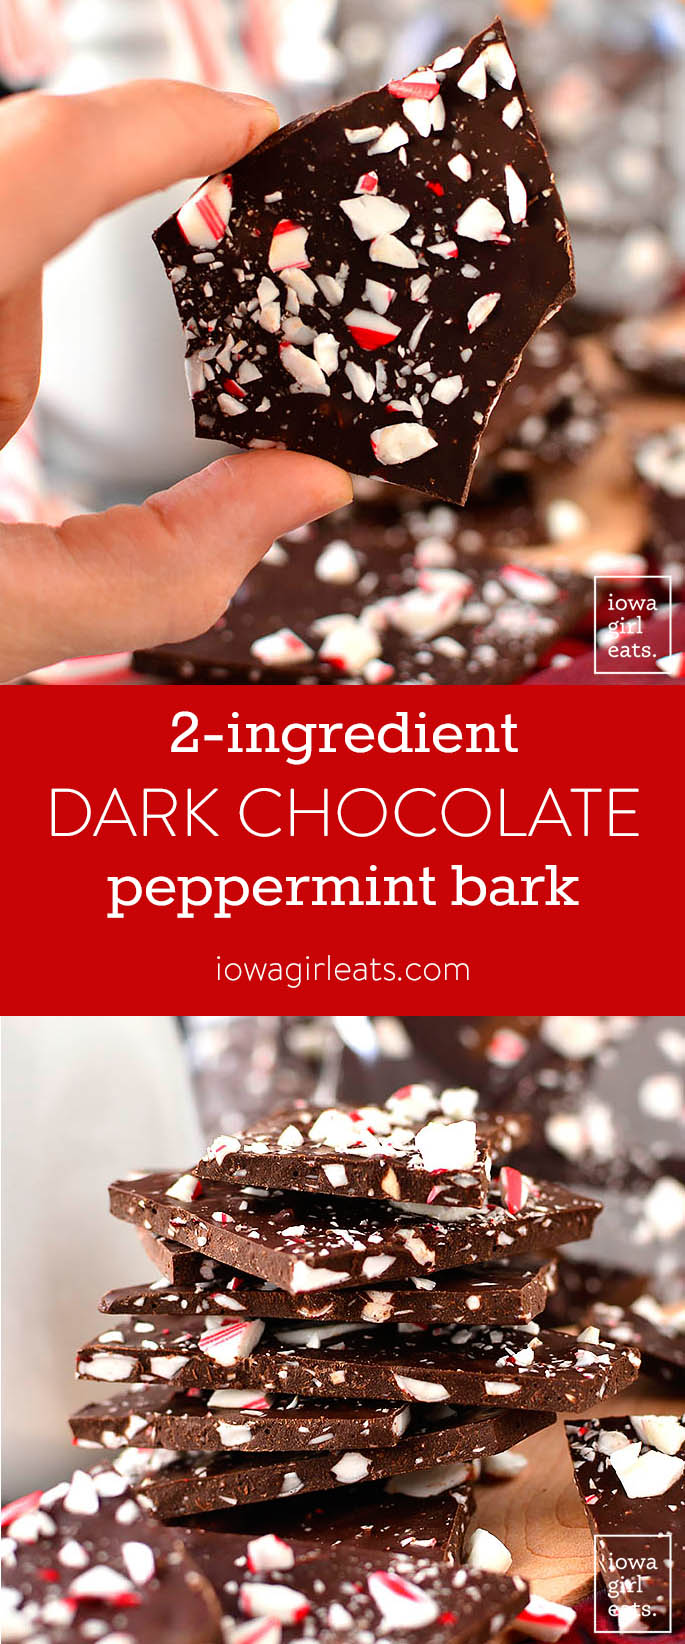 2-Ingredient Dark Chocolate Peppermint Bark couldn't be simpler and is perfect for holiday snacking. Package up and tie with a bow for a sweet homemade gift! | iowagirleats.com